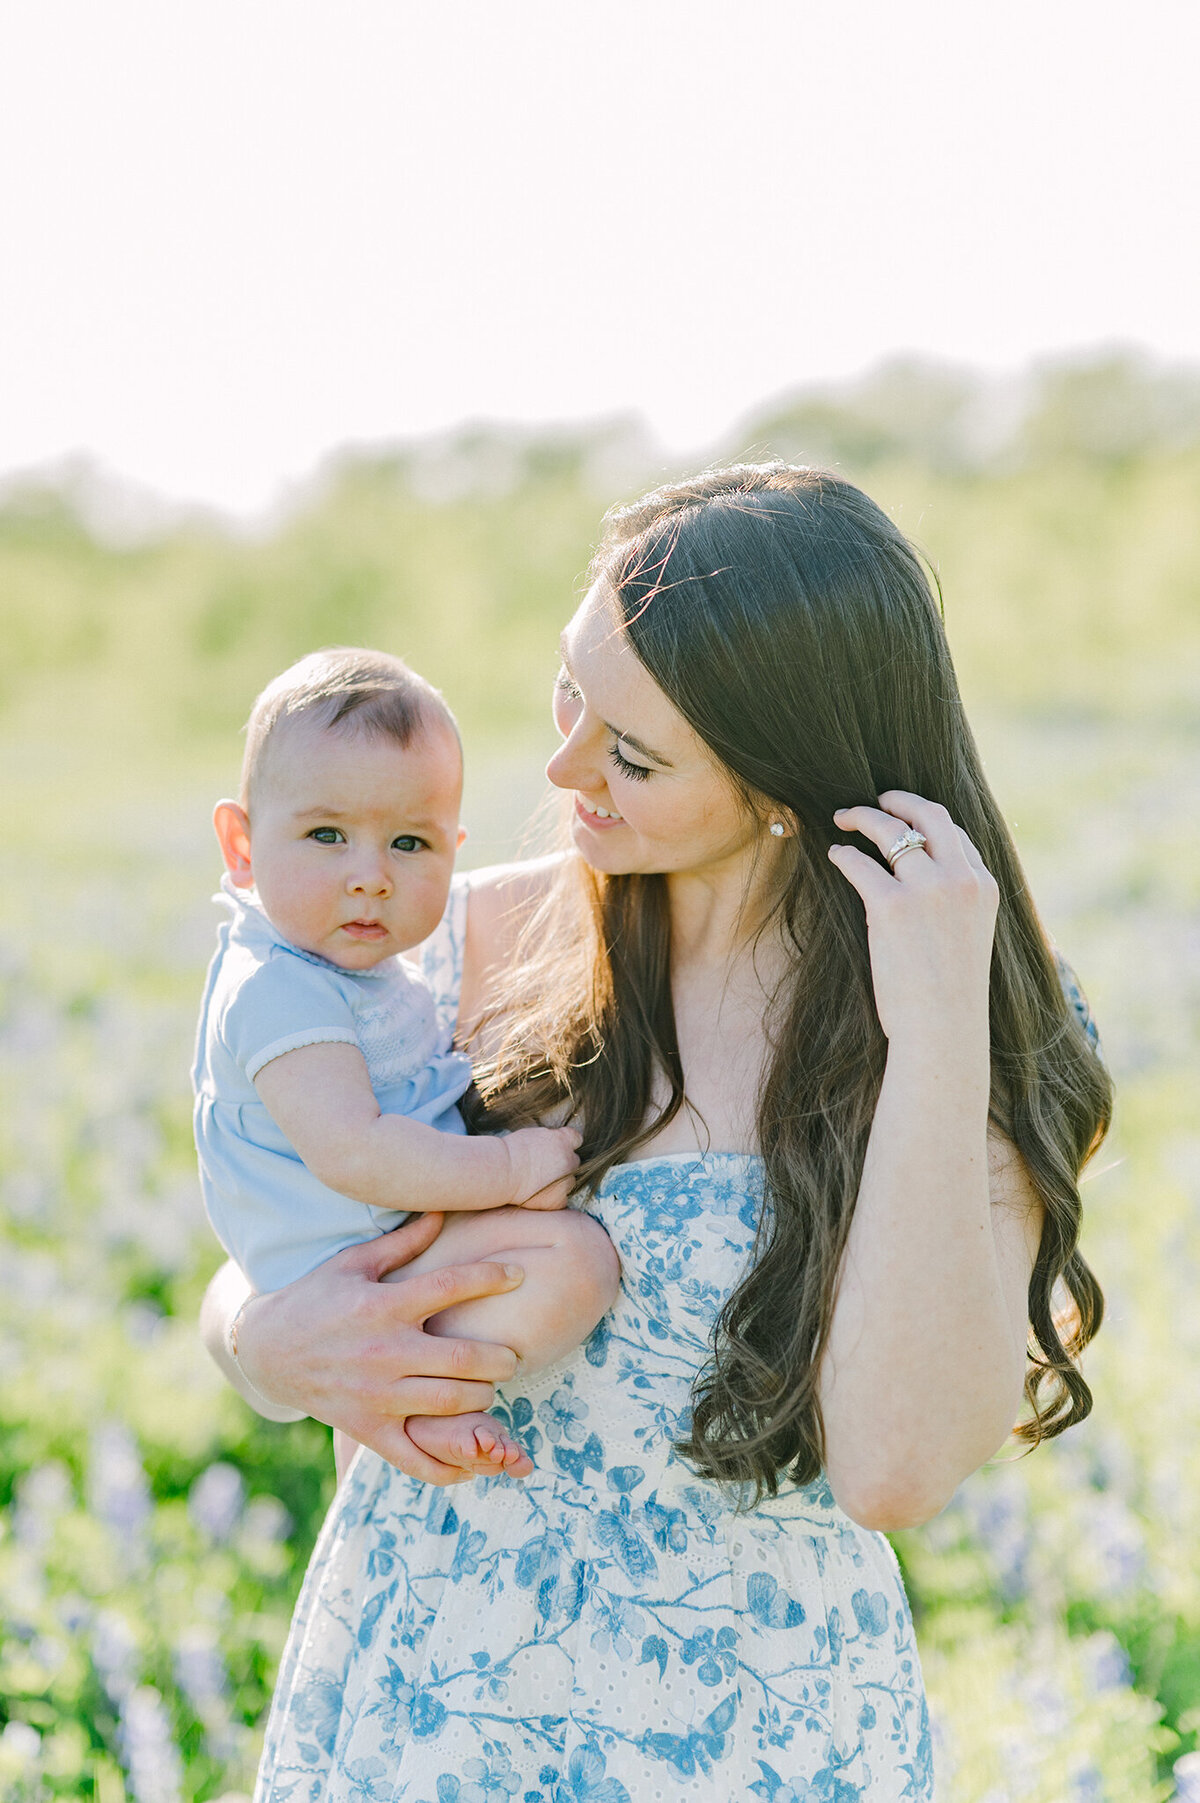 A mom adoring her baby in a field of bluebonnets in Dallas, Texas